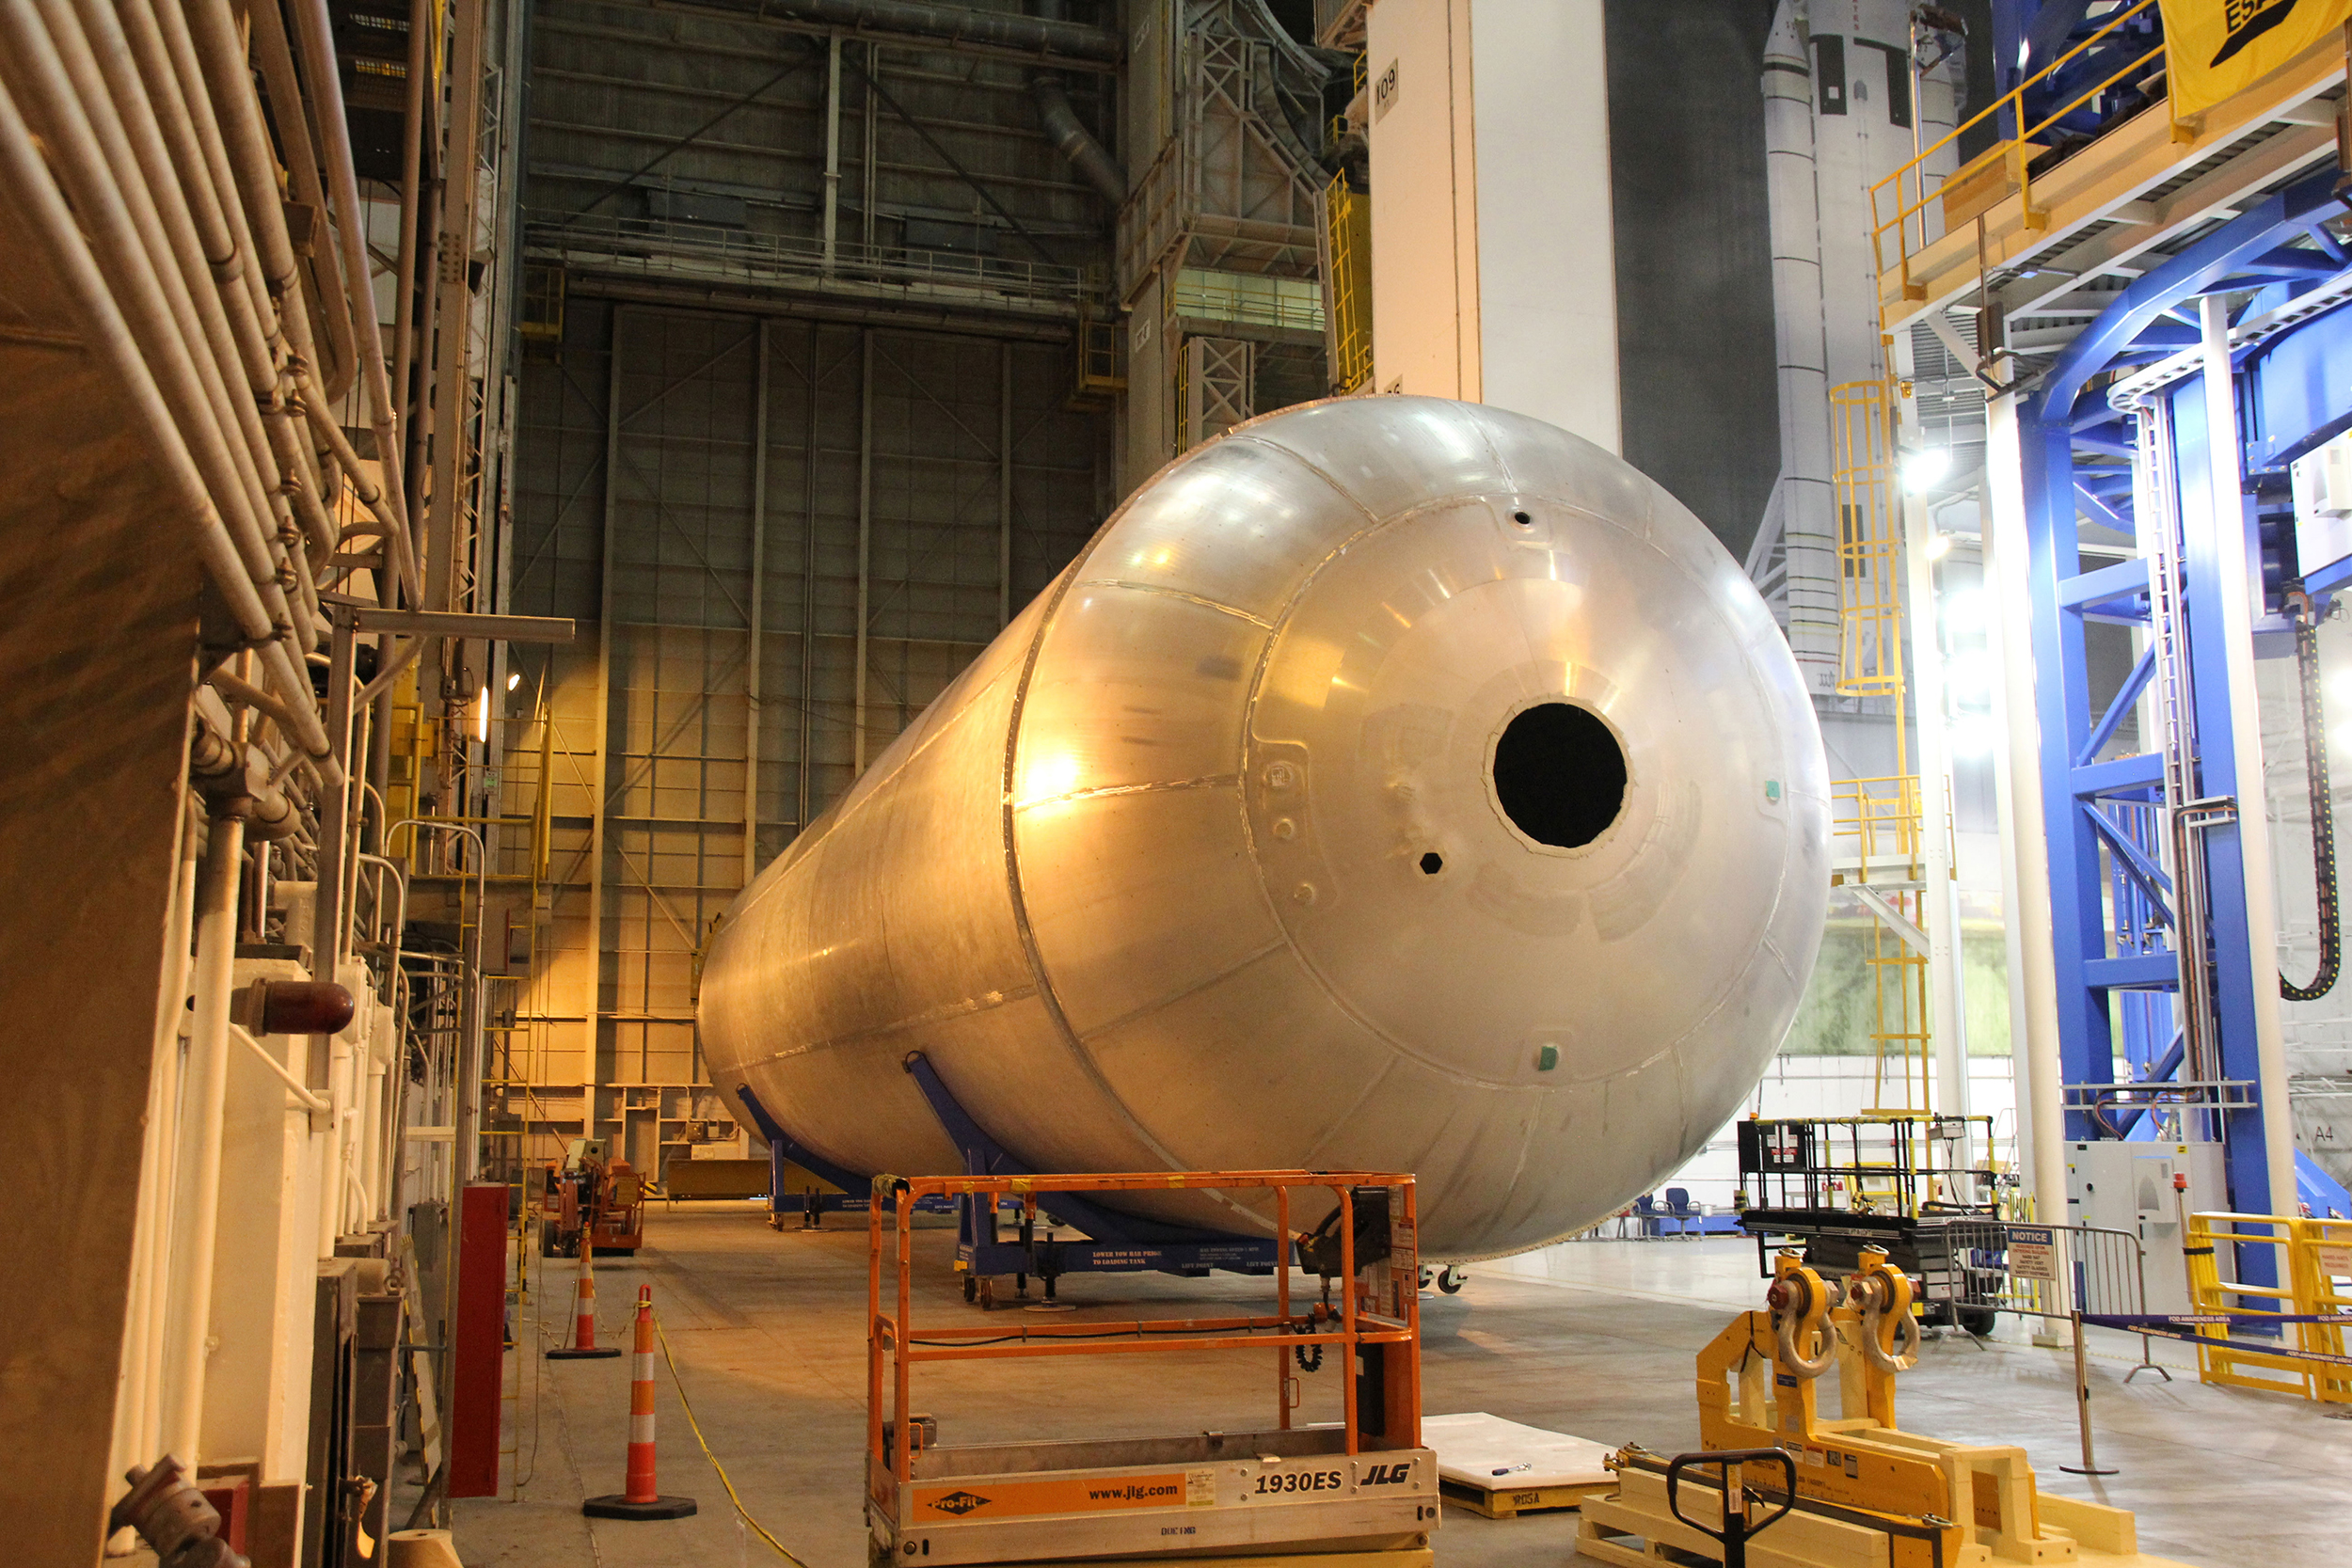 Constructing a new ride NASA’s deep space rocket takes shape in New